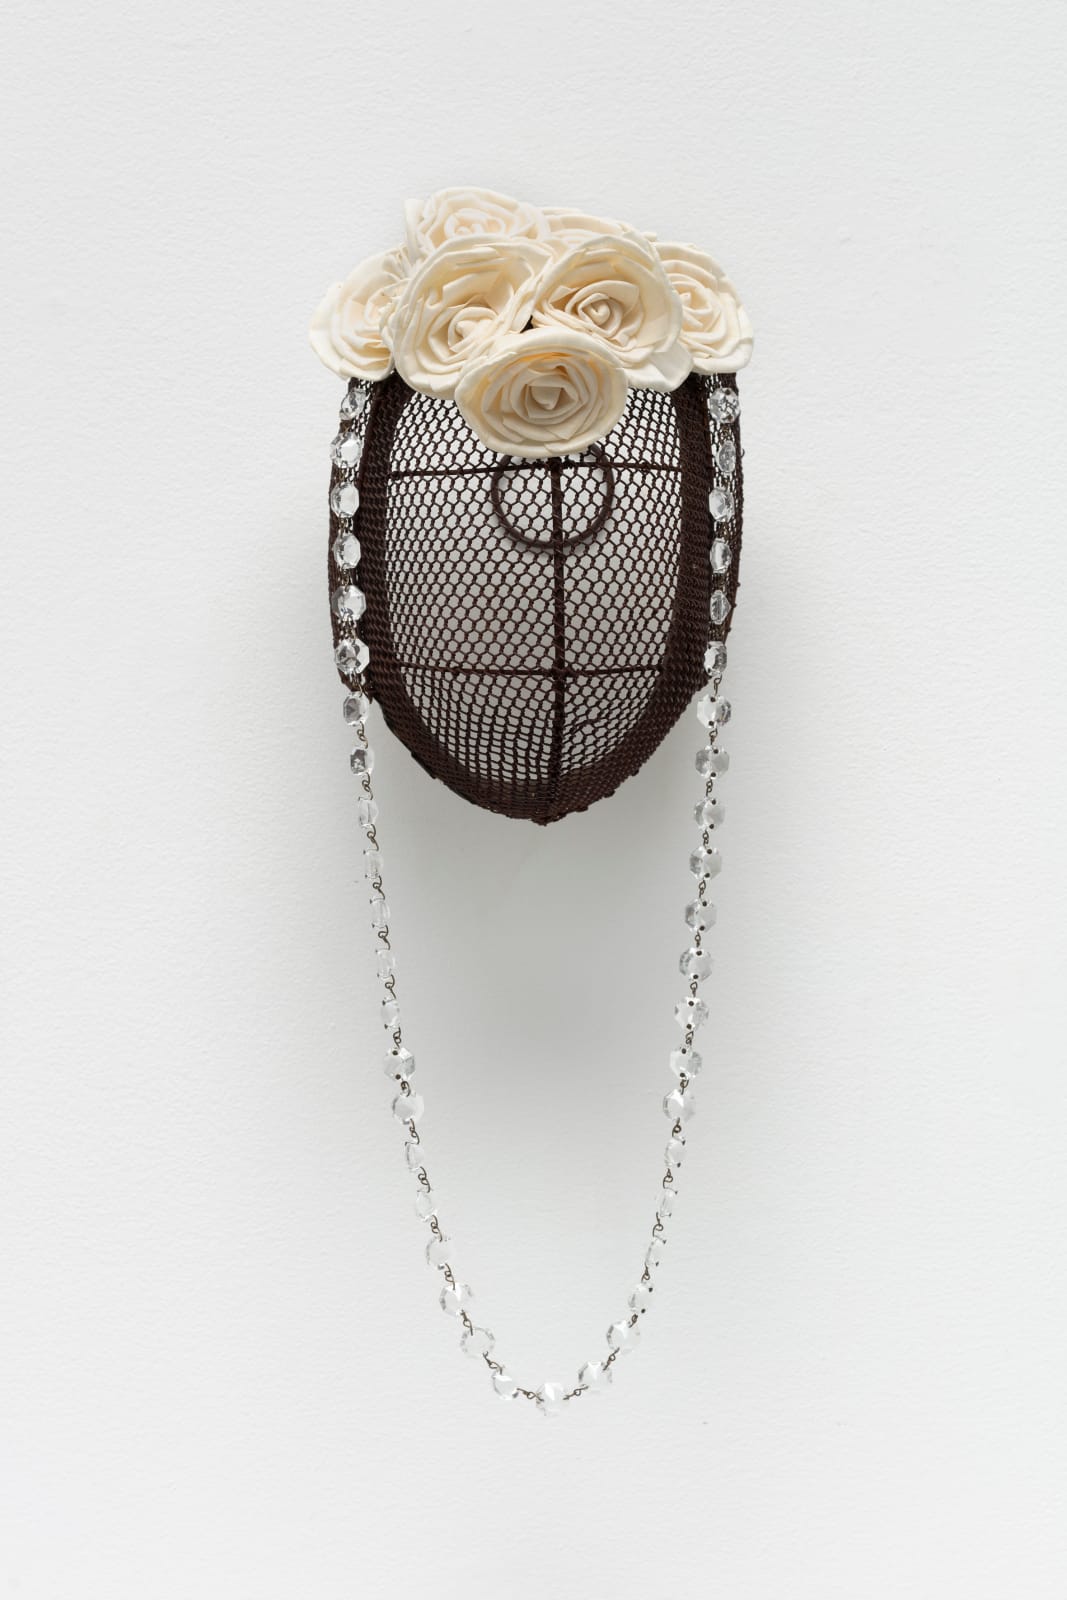 Allison Janae Hamilton, Mask with Flowers and Crystals II, 2021